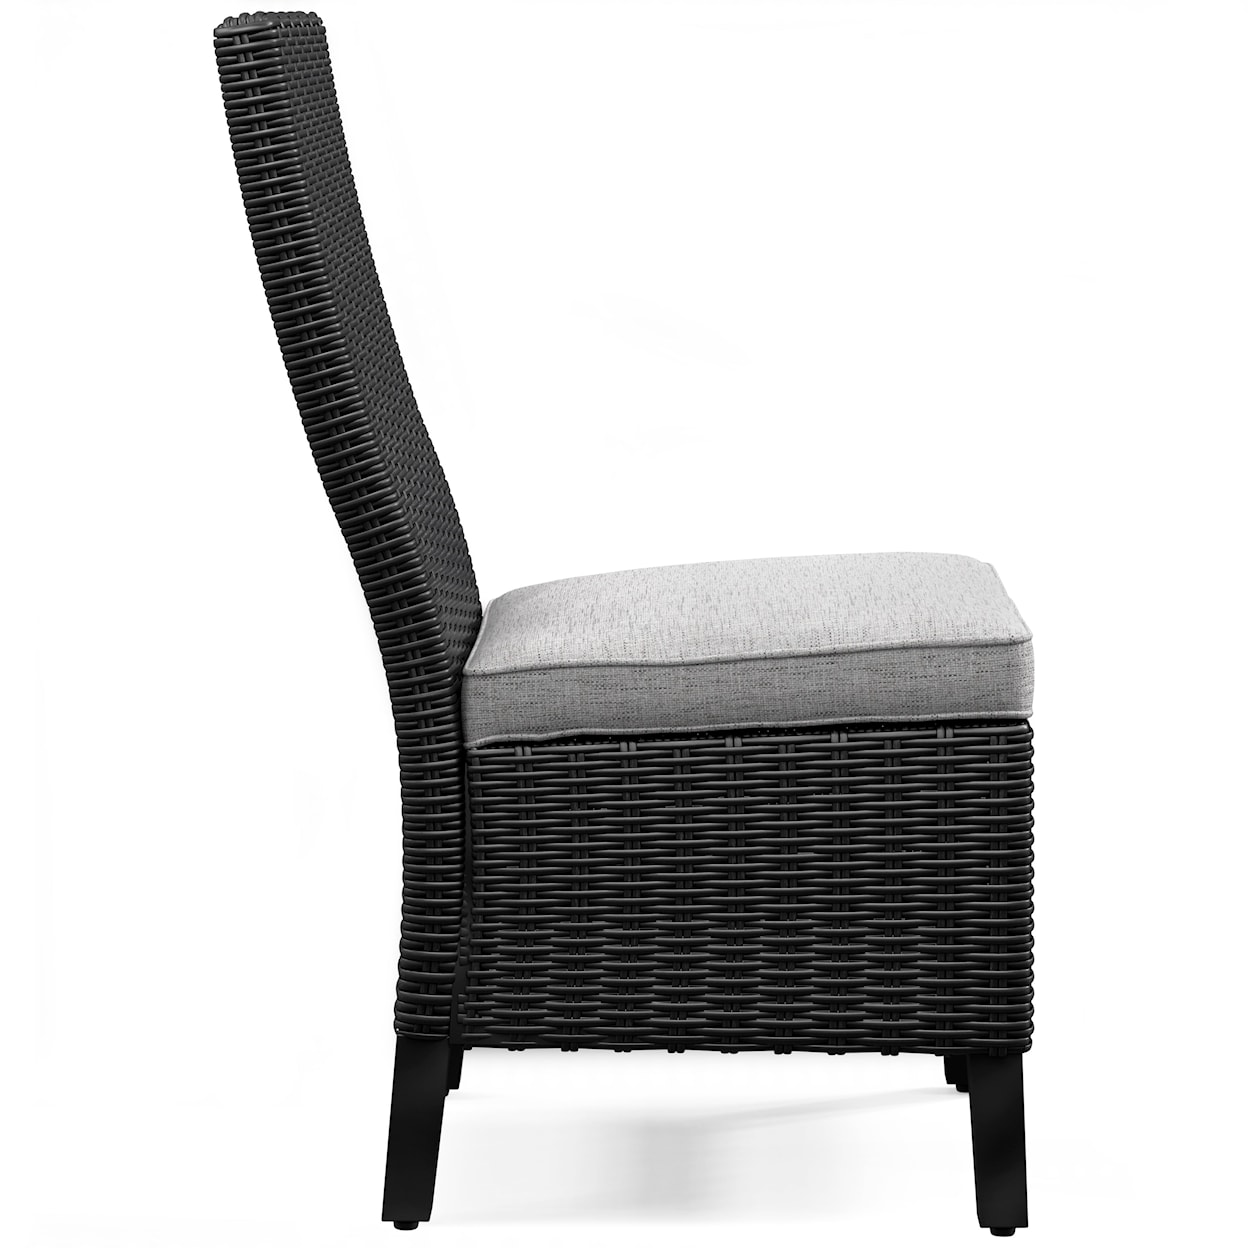 Belfort Select Bethany Side Chair with Cushion